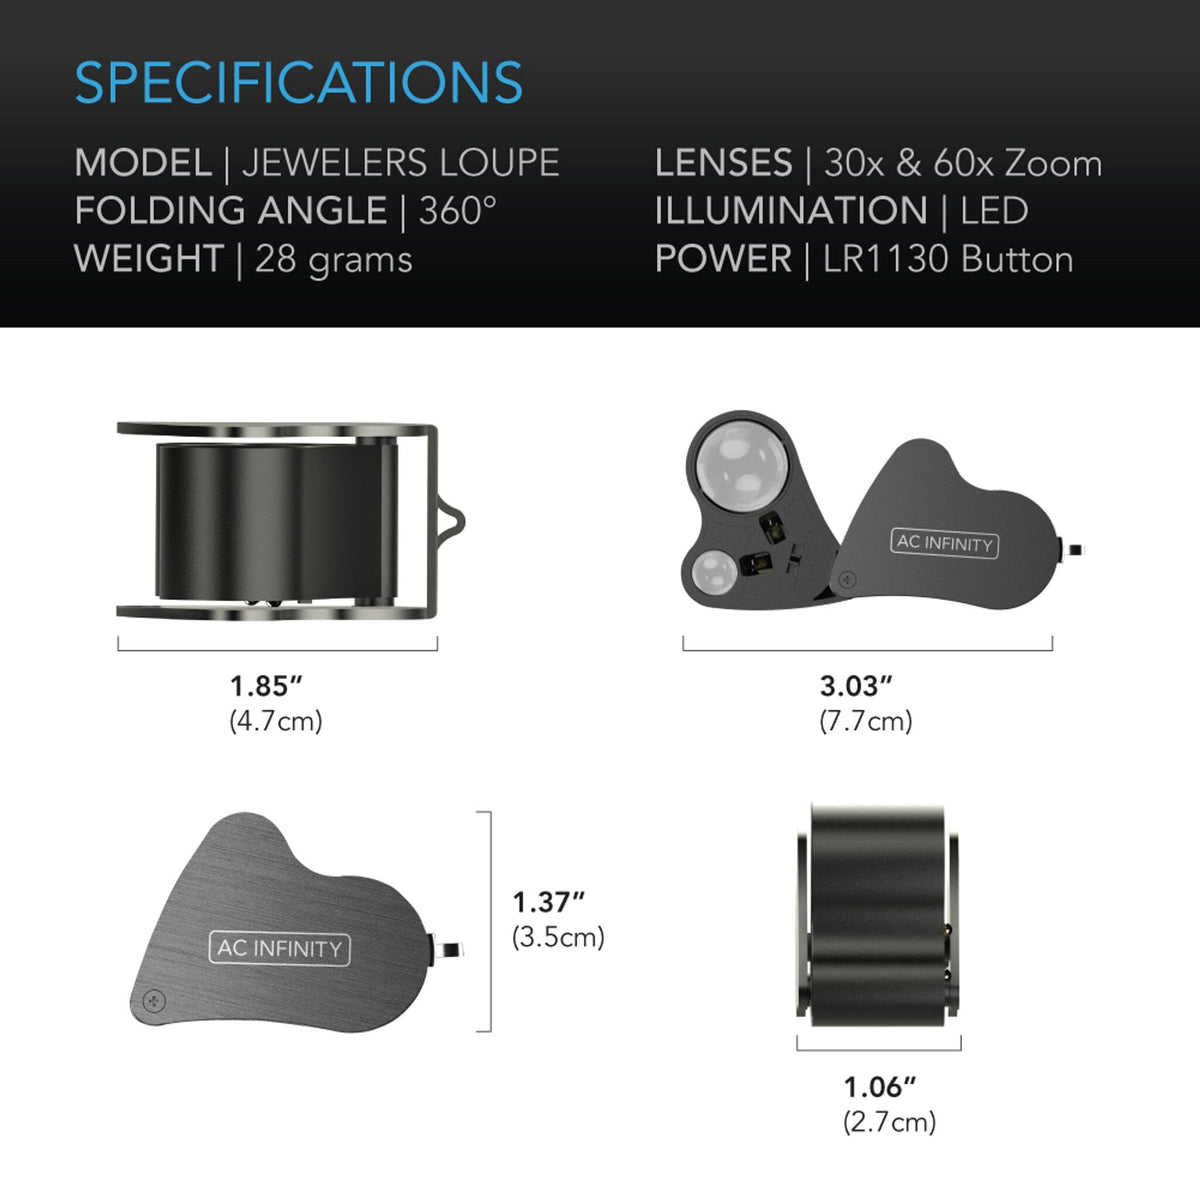 Jewelers loupe specification